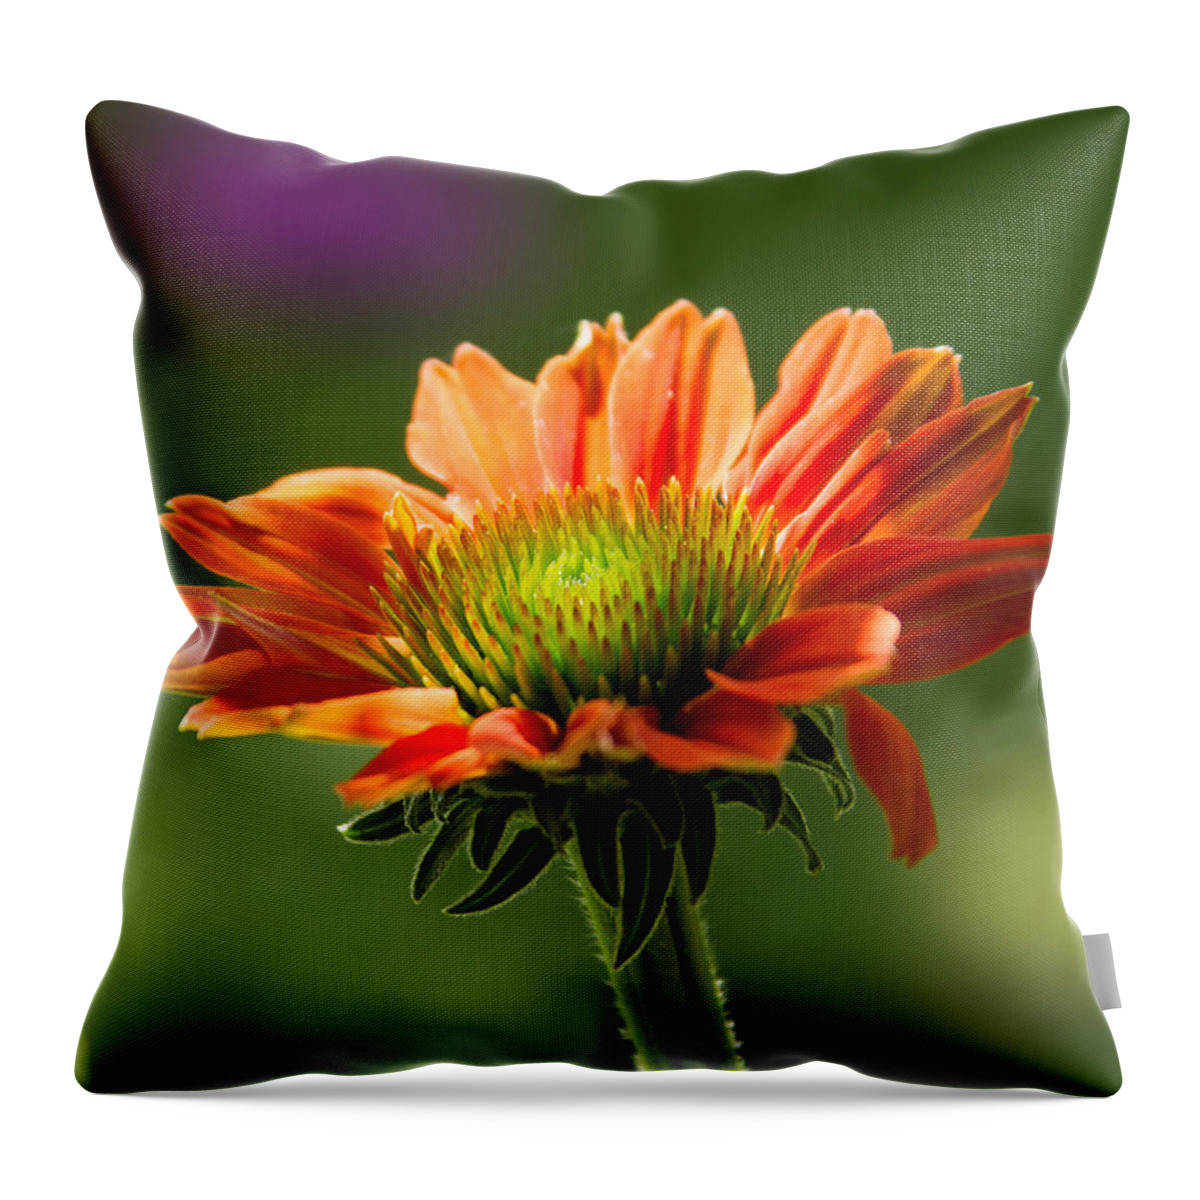 Cone Throw Pillow featuring the photograph Cone Flower by Brian Caldwell